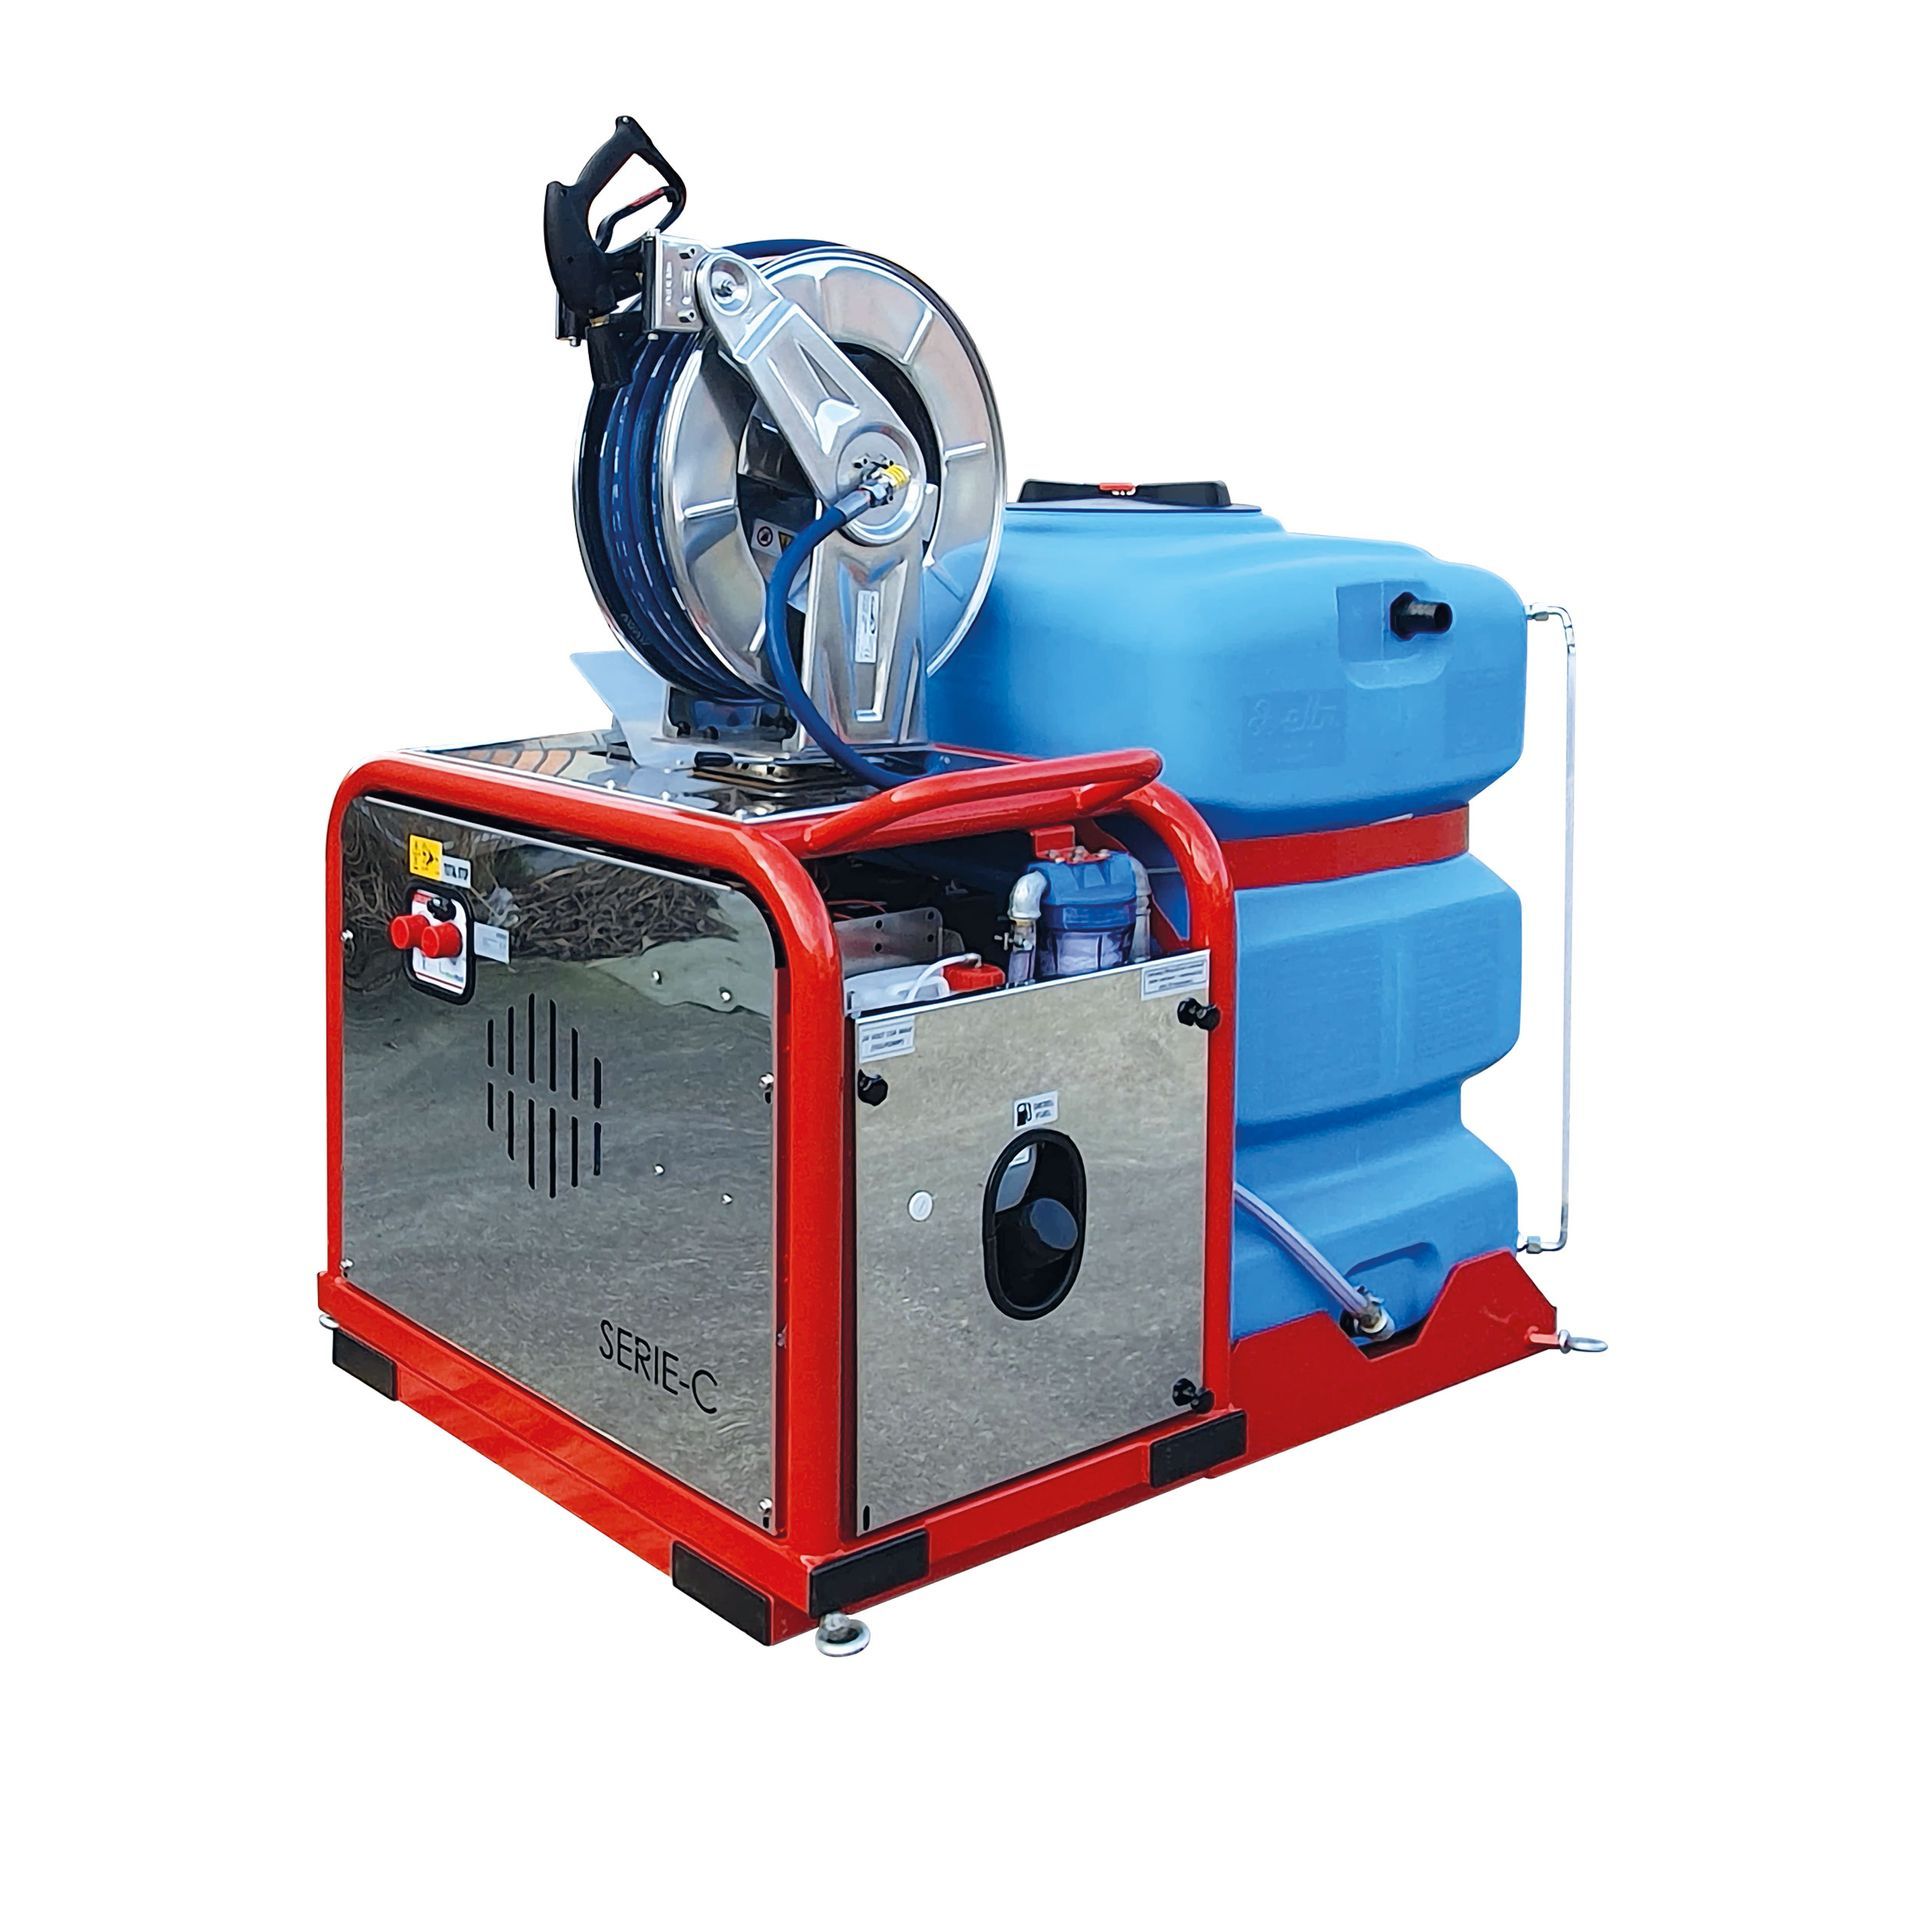 Meclean professional hot water high-pressure cleaner SERIE-CFB with WeedPLUS